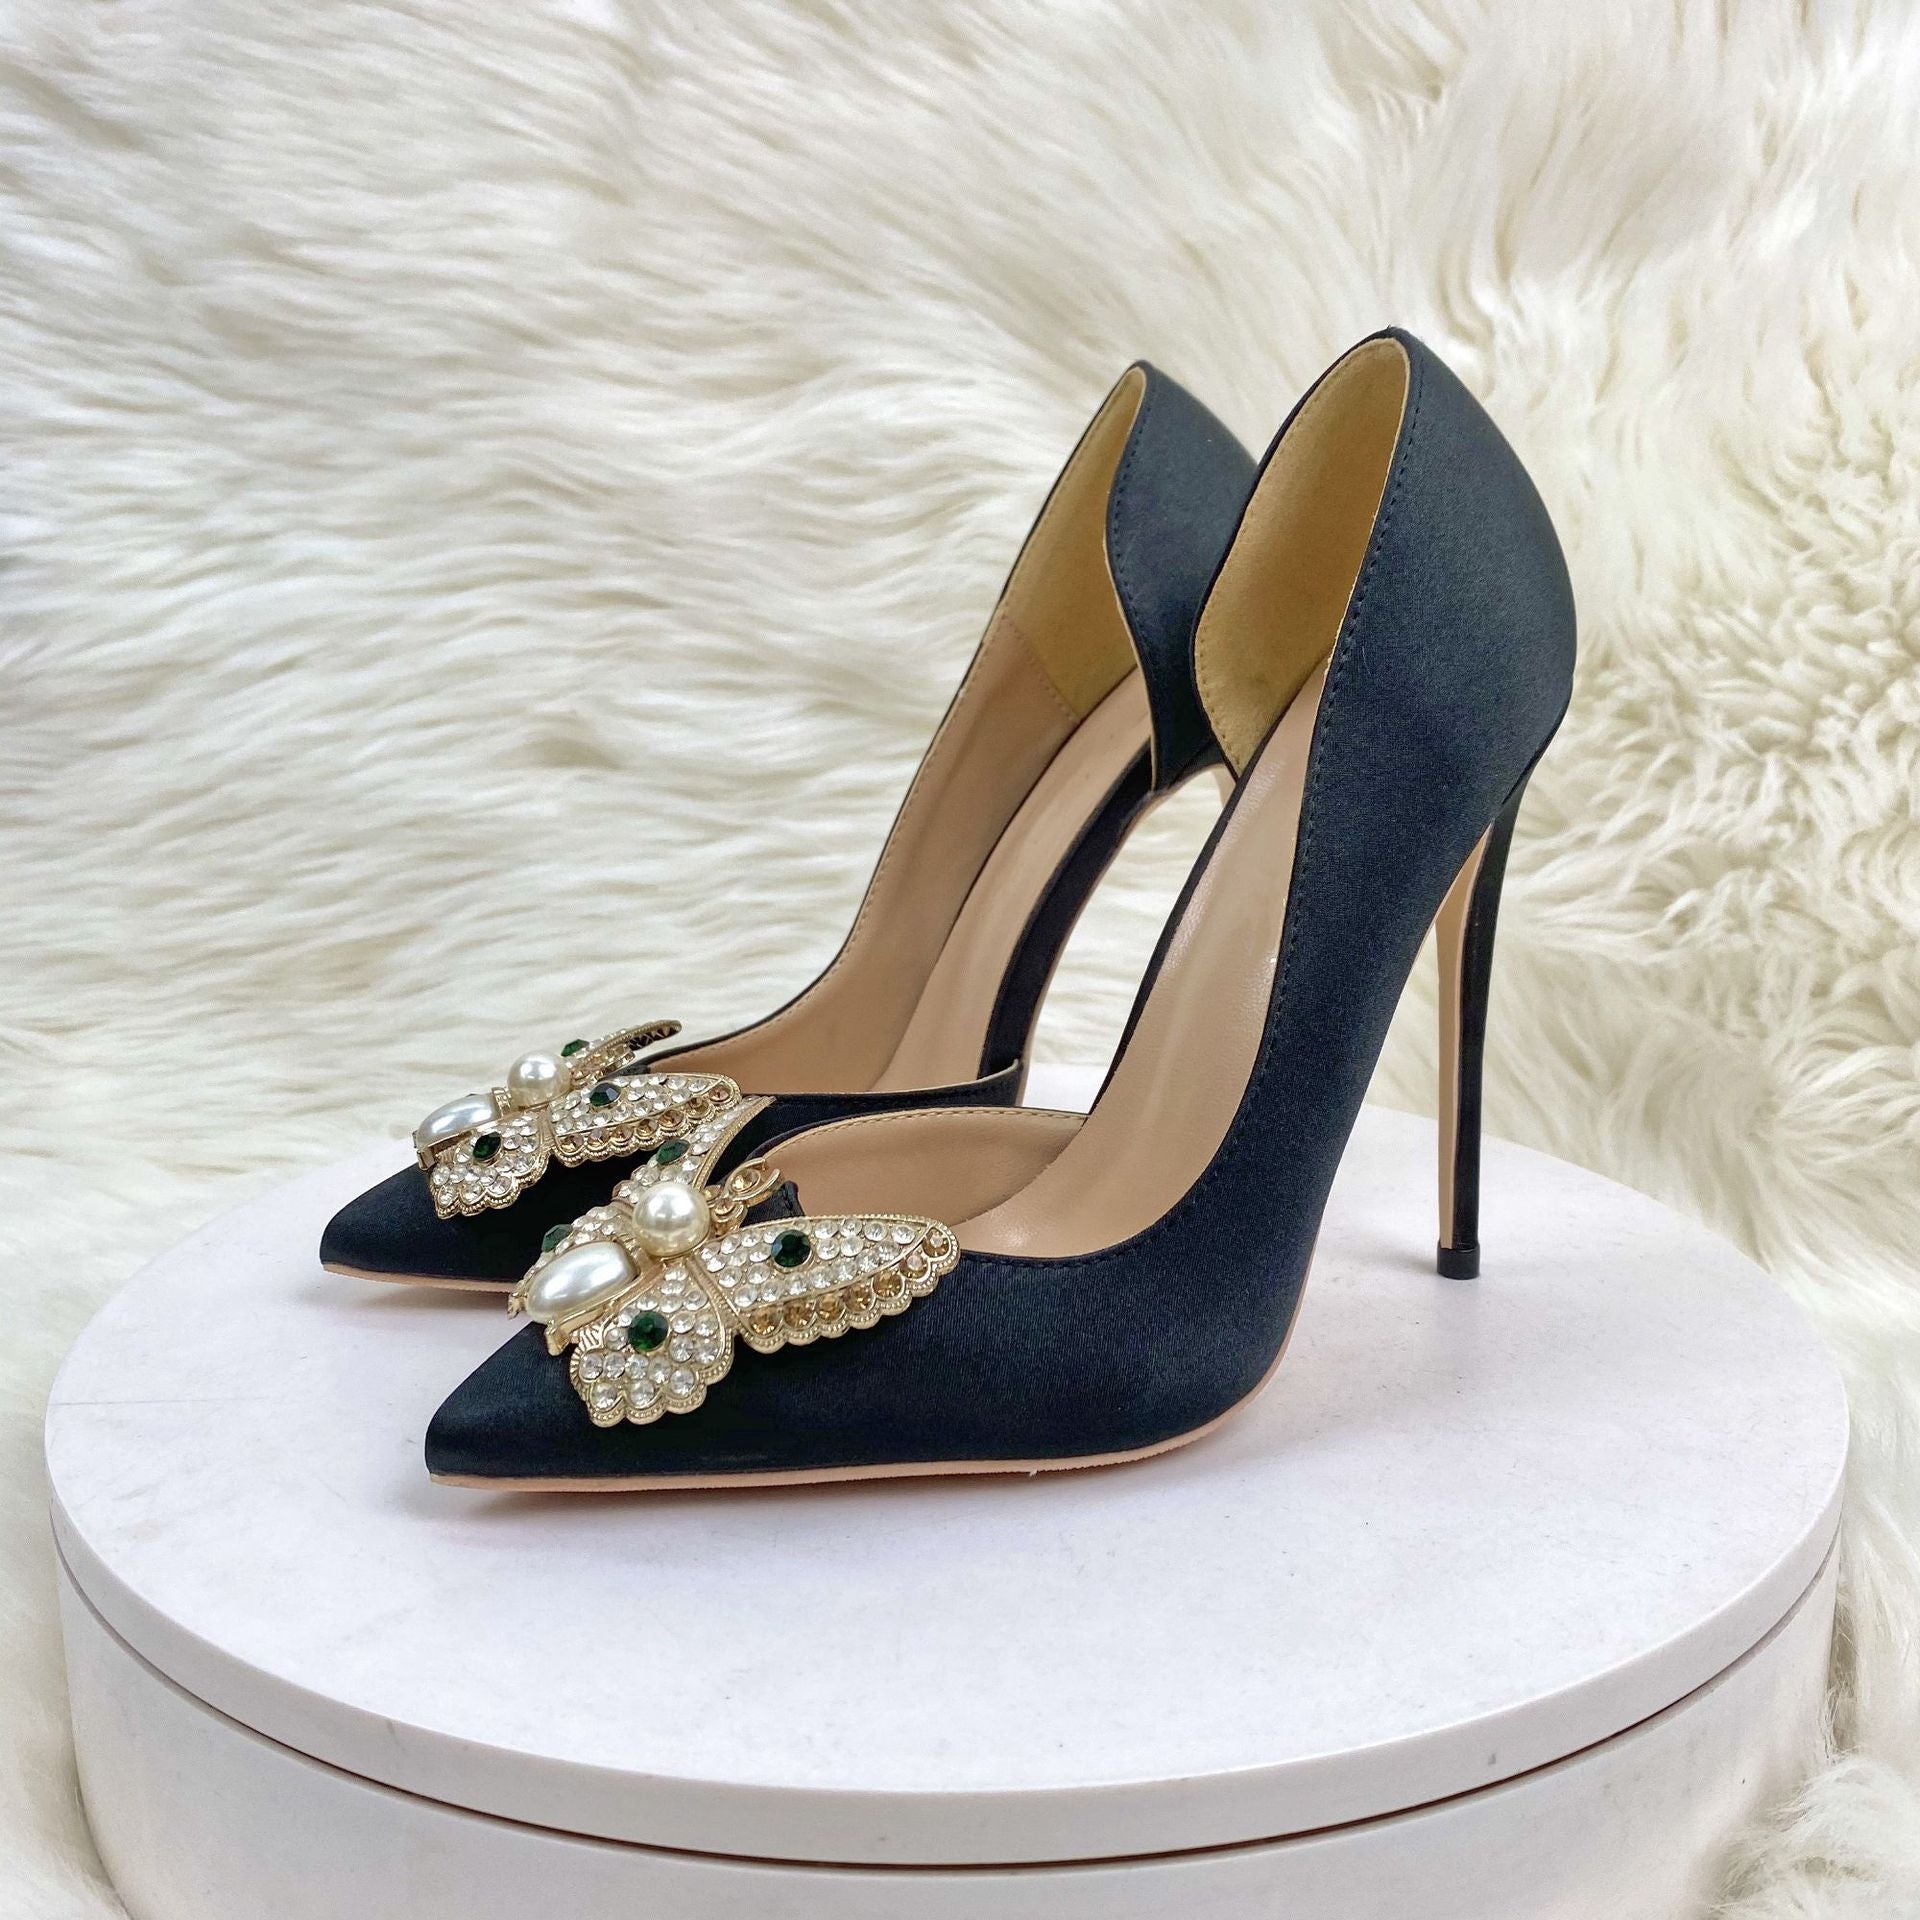 Stiletto Heels Shoes | Pointed Toe Shoes | Rhinestone Shoes